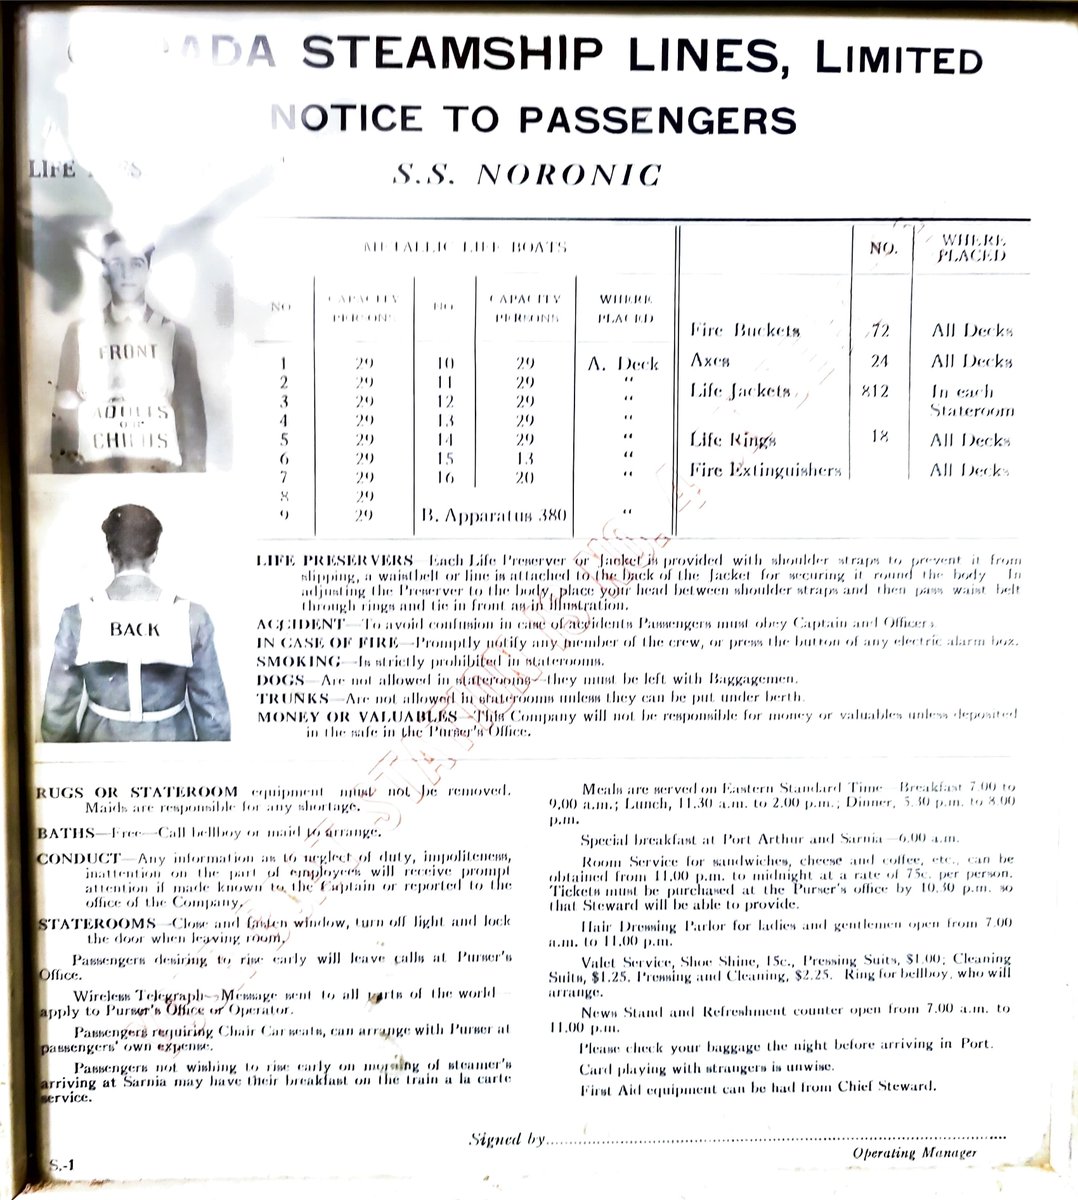 #maritime #historians #noronic #greatlakes #canadasteamshiplines
Safety info for passengers on the S.S.Noronic